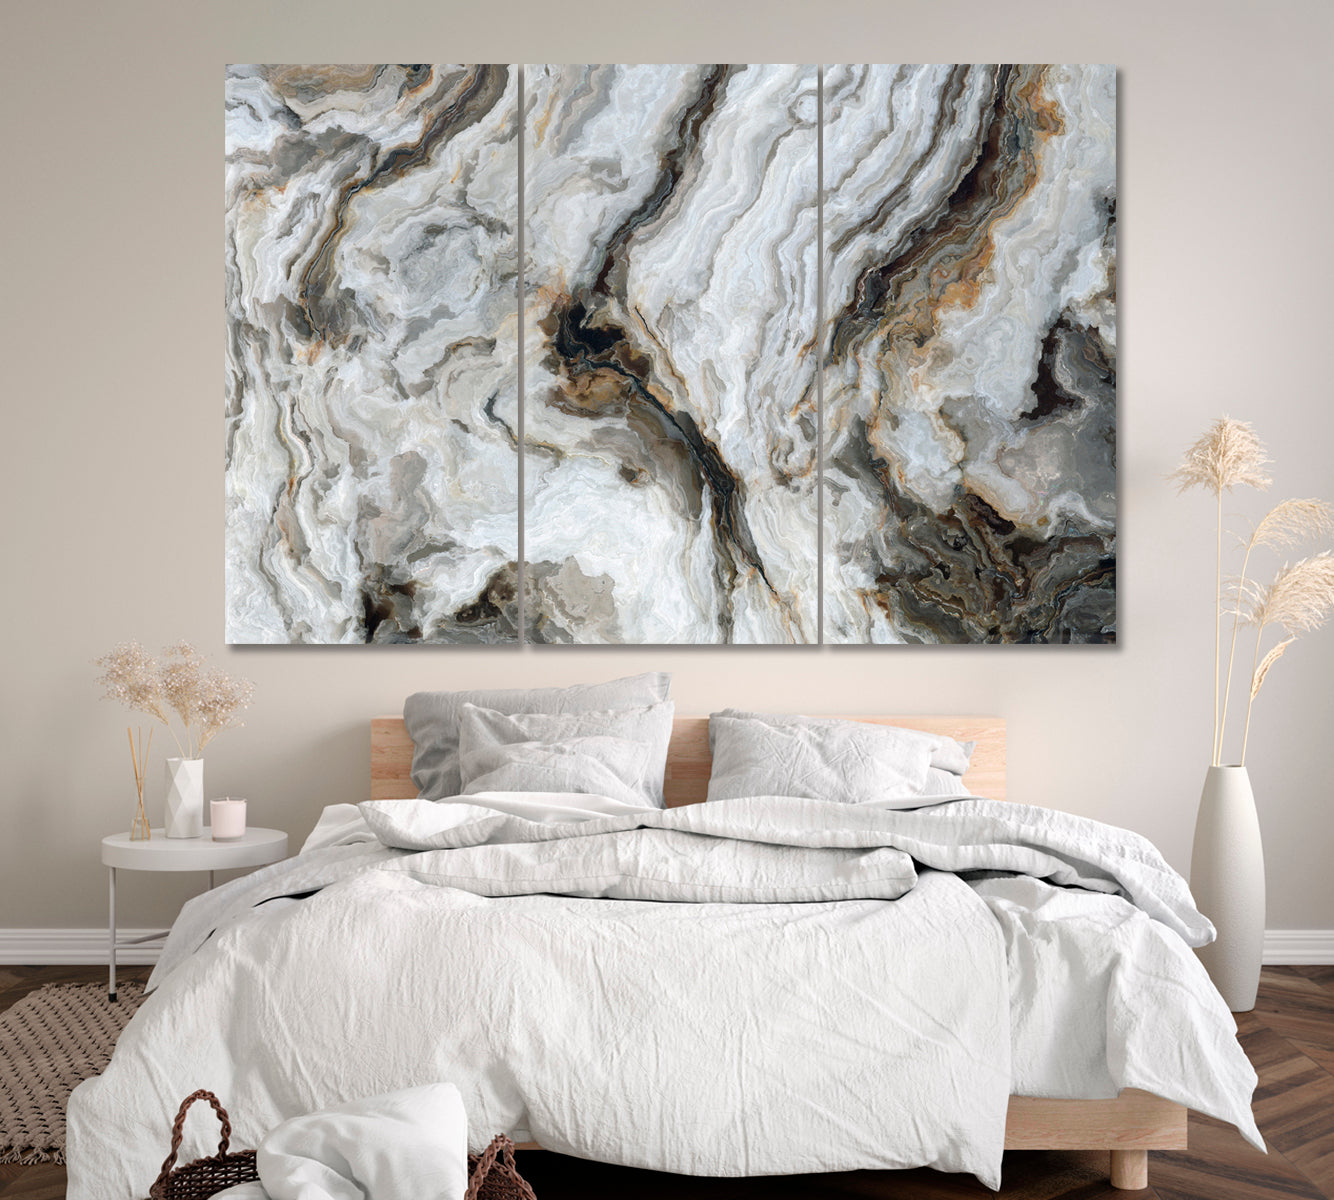 Abstract Marble with Curly Grey Veins Canvas Print ArtLexy 3 Panels 36"x24" inches 